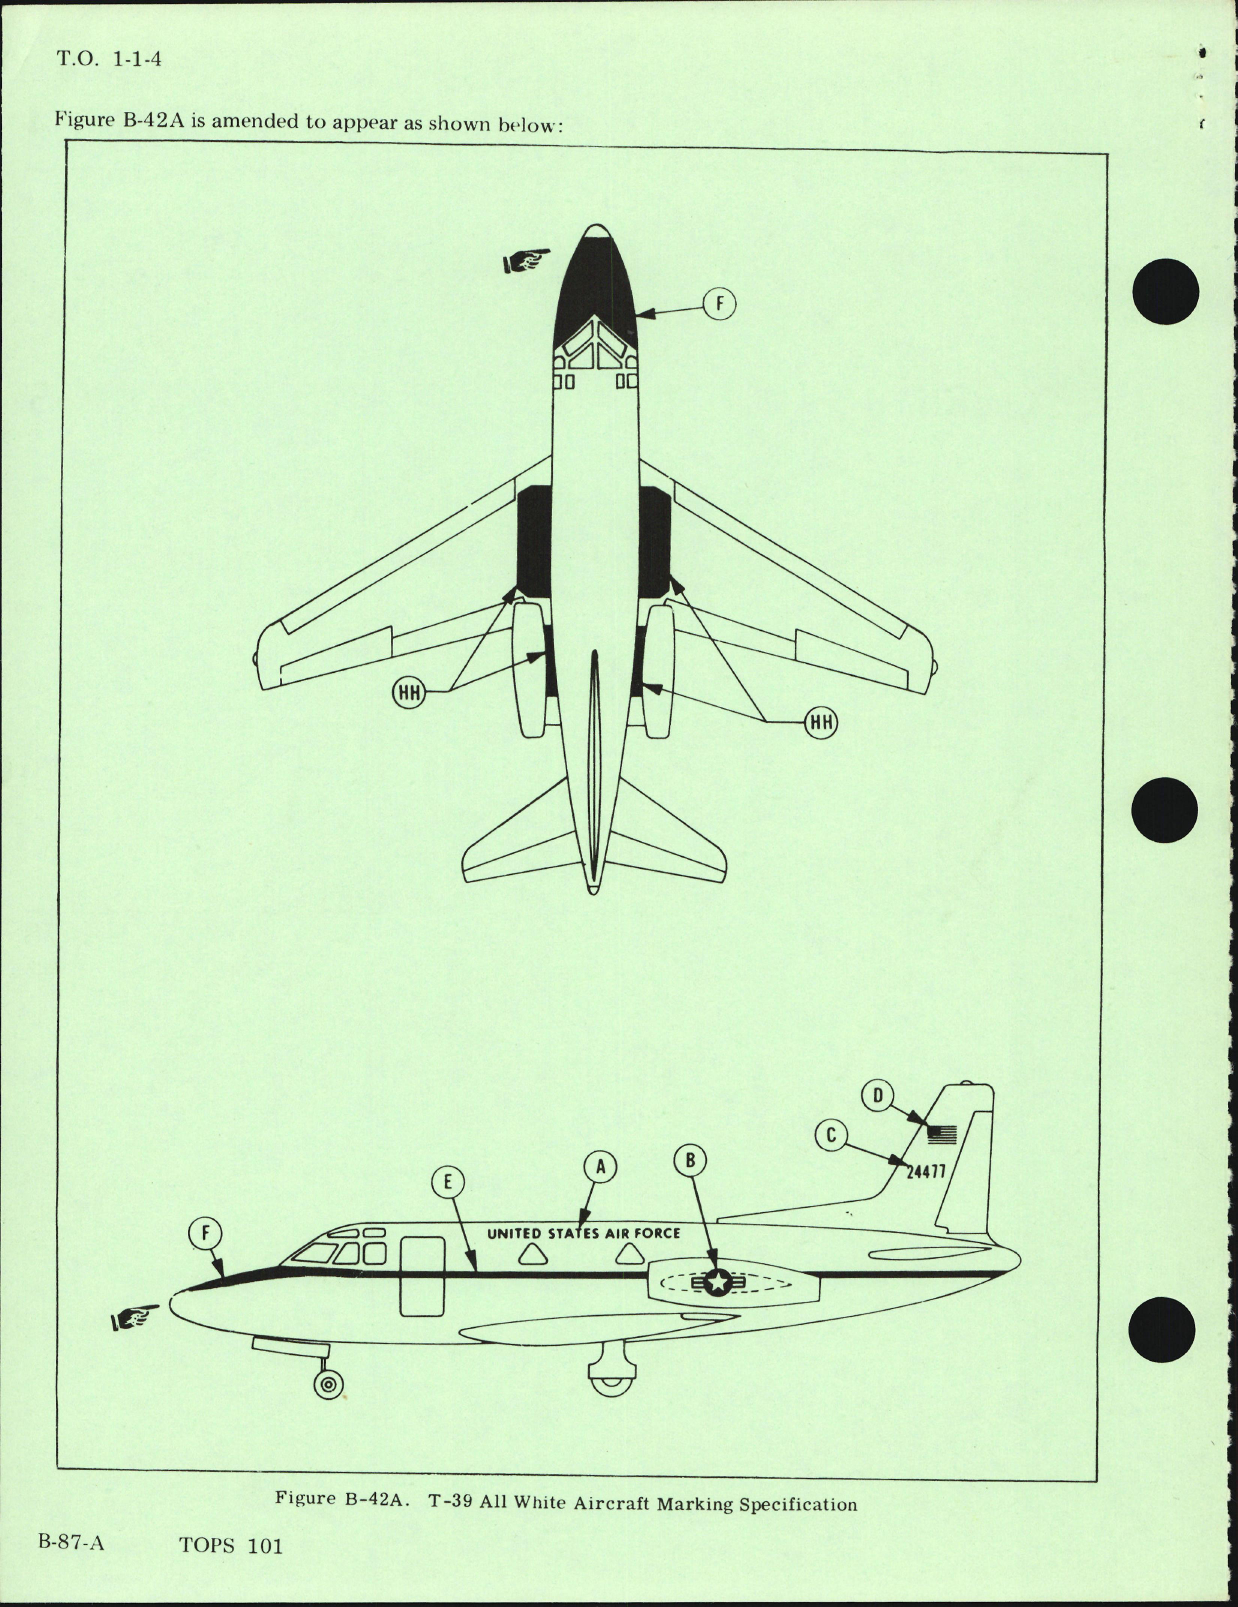 Sample page 8 from AirCorps Library document: Exterior Finishes, Insignia and Markings for USAF Aircraft - TOPS 101